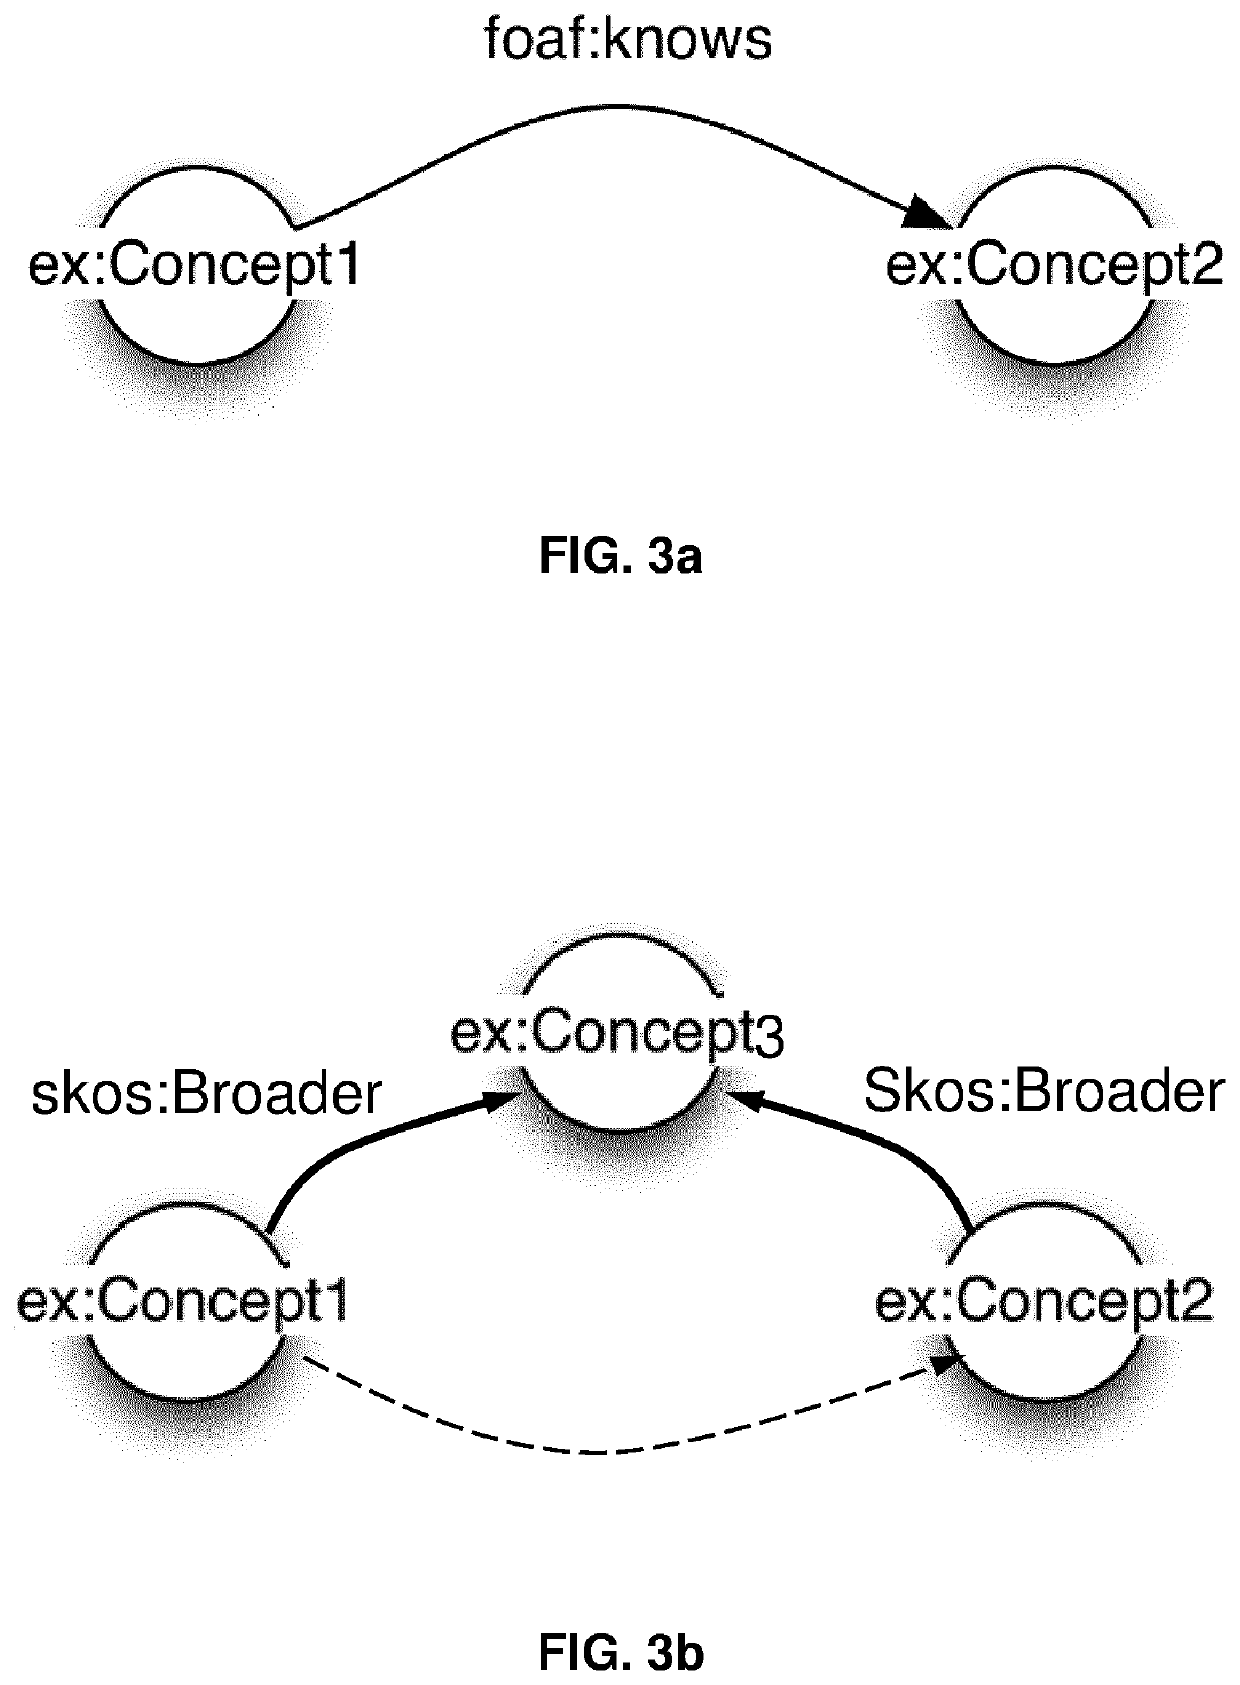 Method for discovering relevant concepts in a semantic graph of concepts